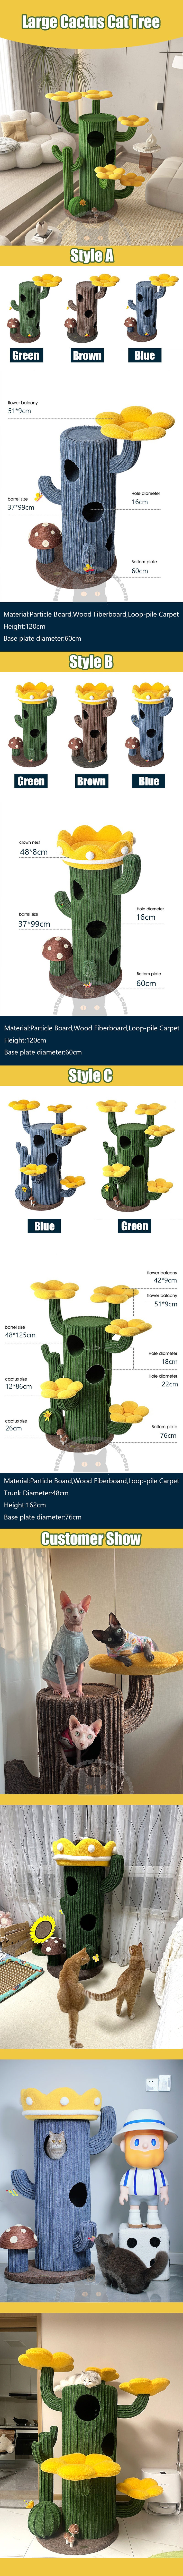 Deluxe Large Cactus Solid Cat Tree